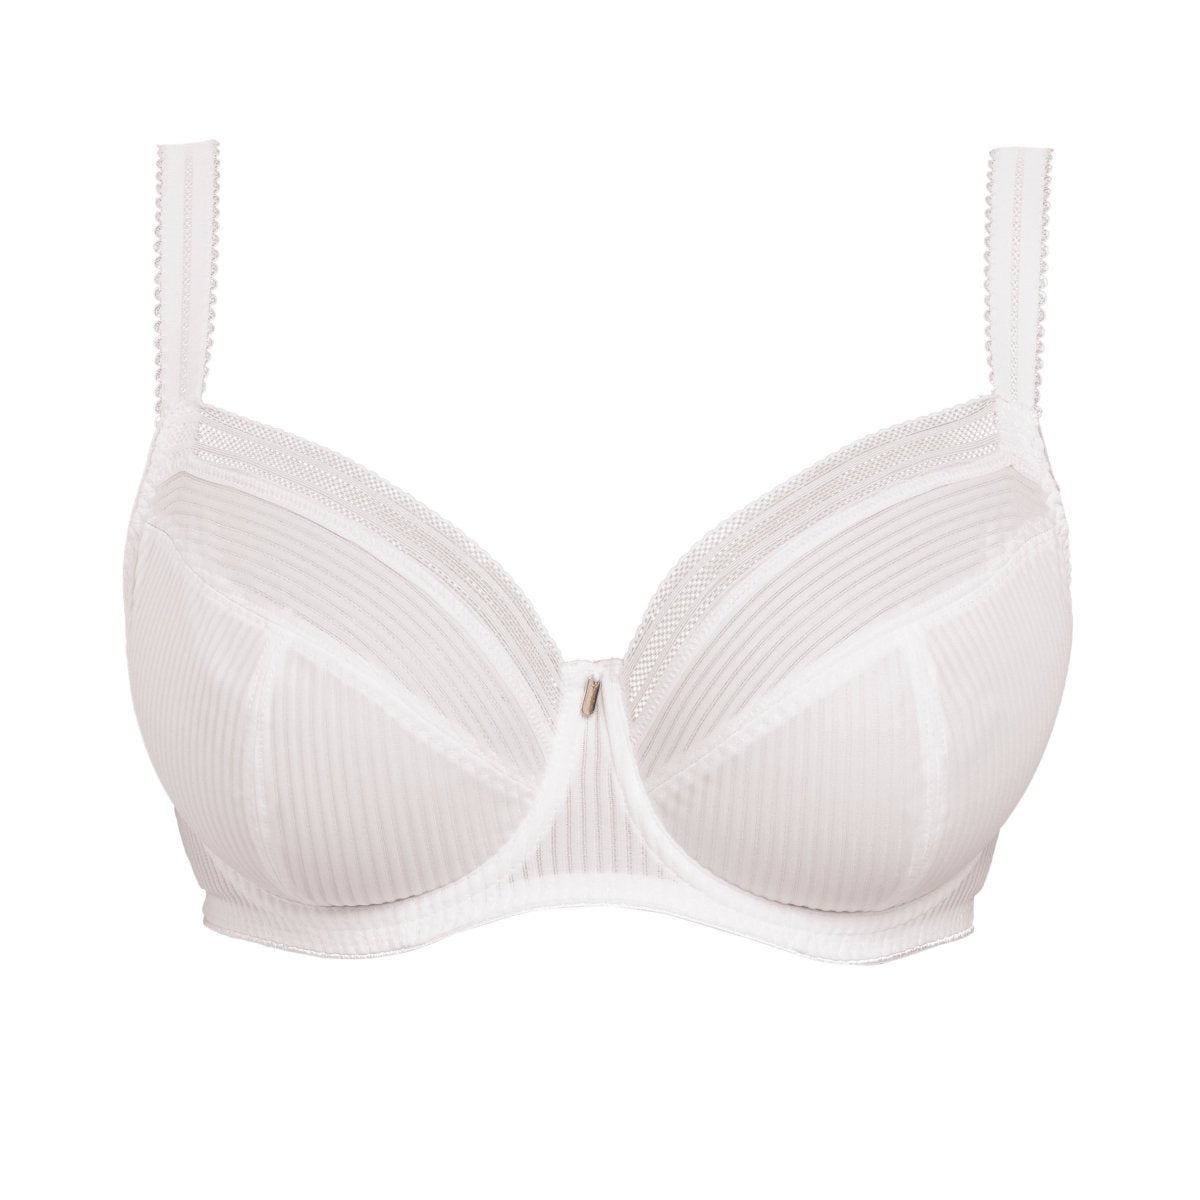 Fusion UW Full Cup Side Support Bra FL3091